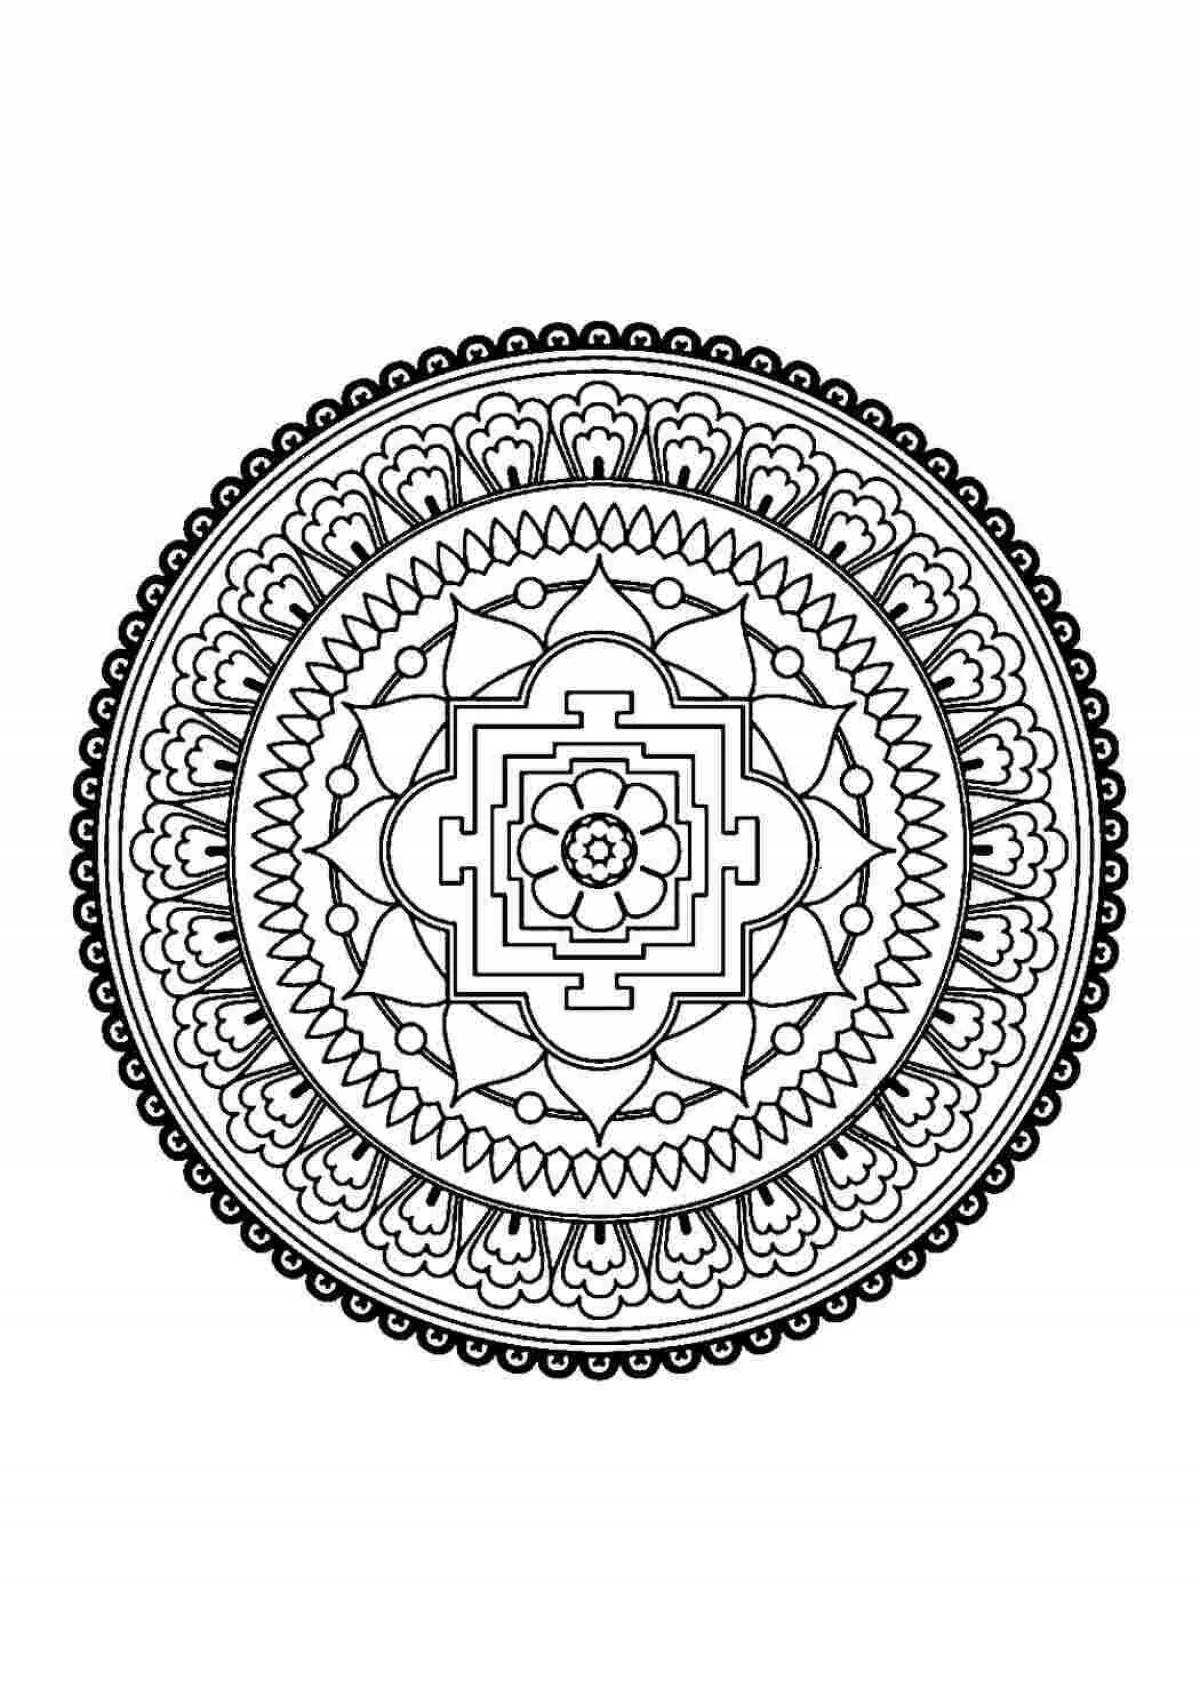 Amazing mantras coloring page